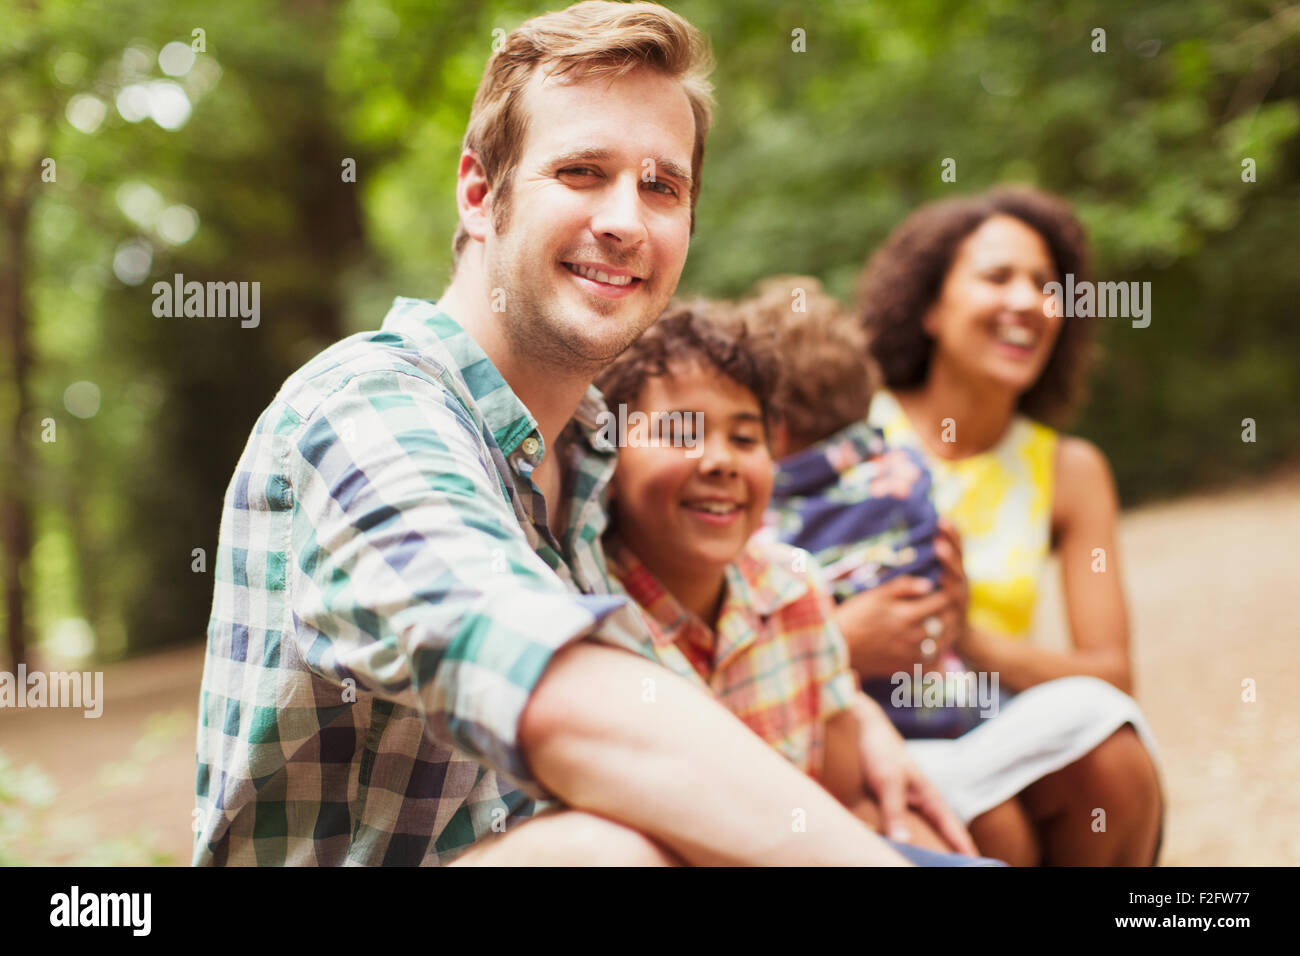 Portrait smiling father with son Stock Photo